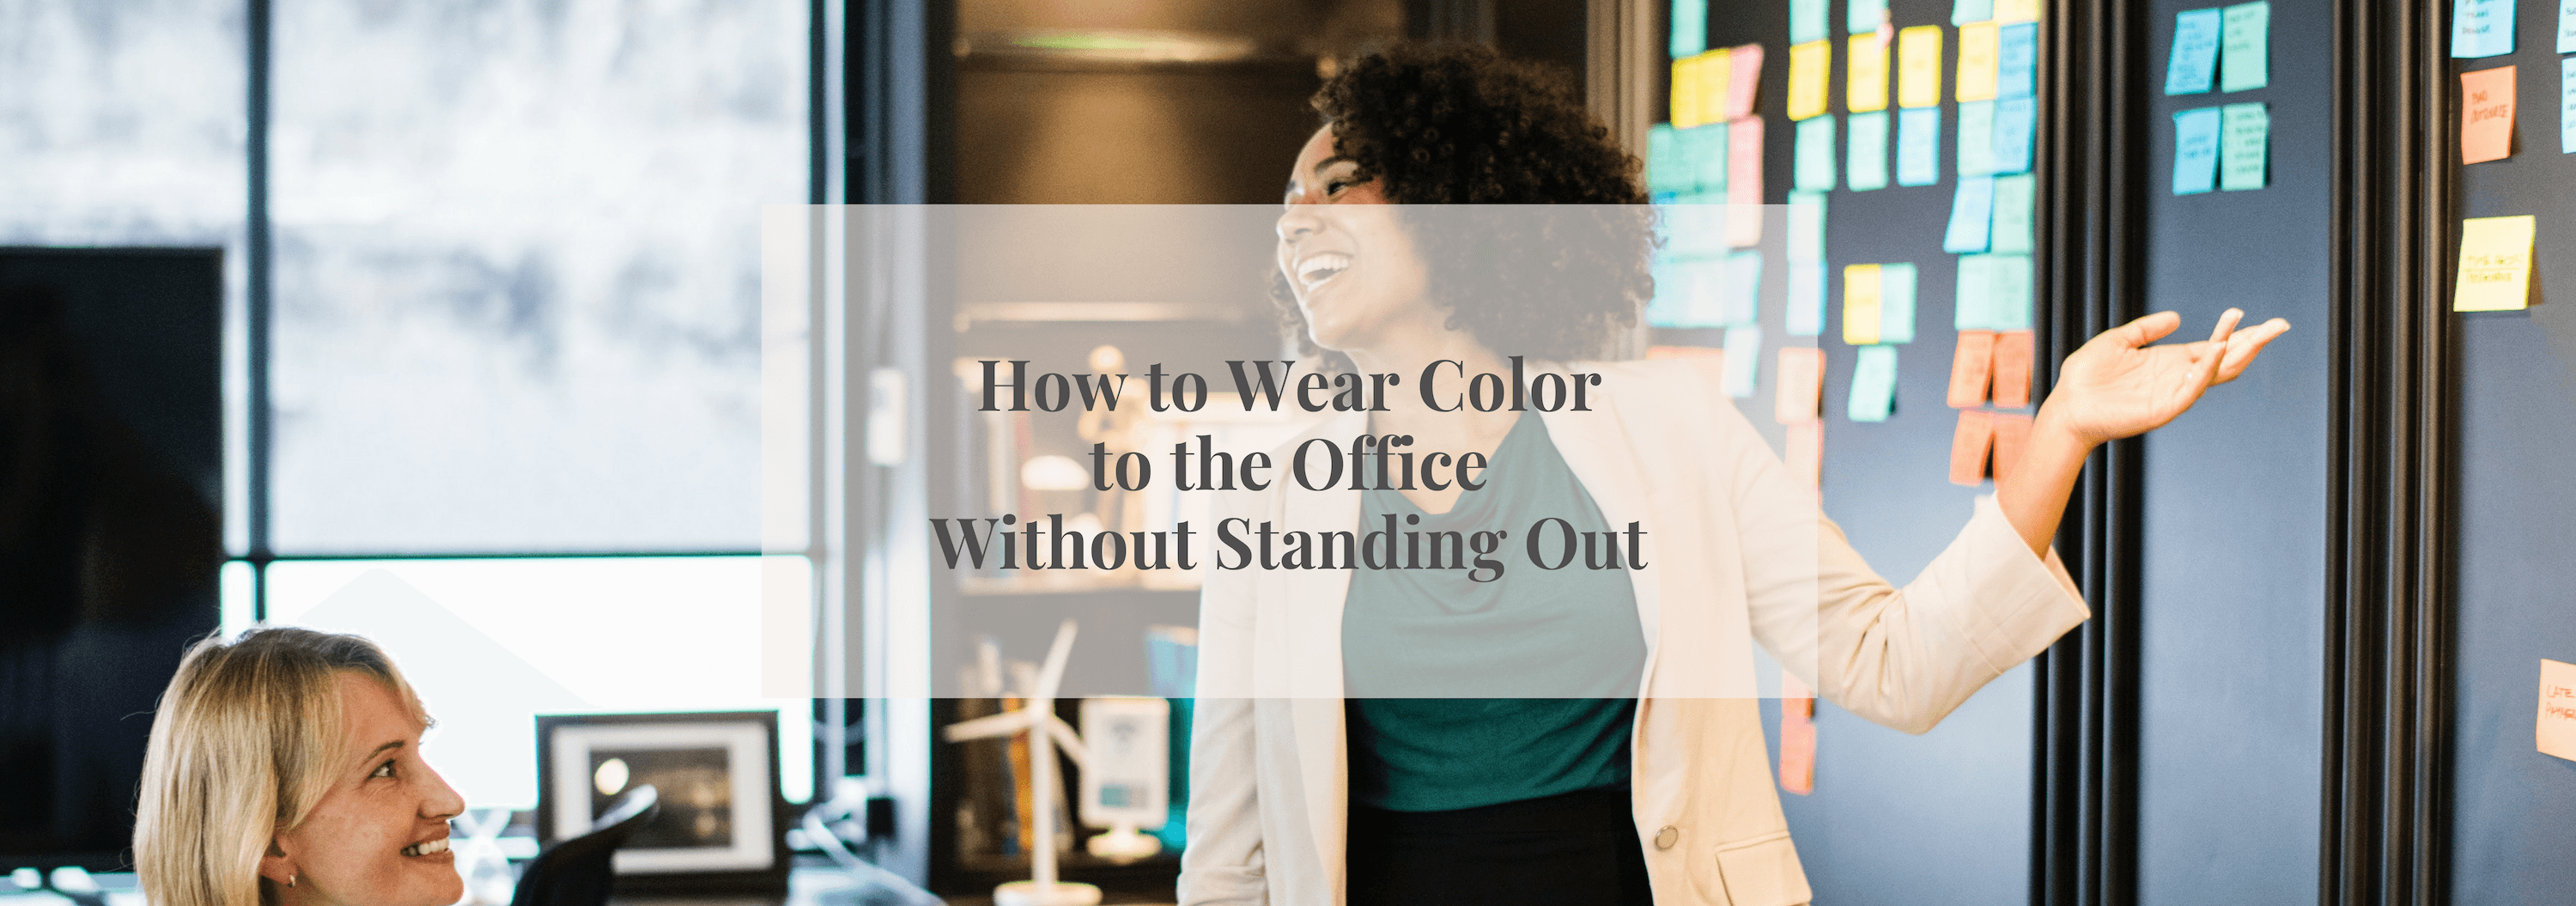 How to Wear Color to the Office Without Standing Out - Numi